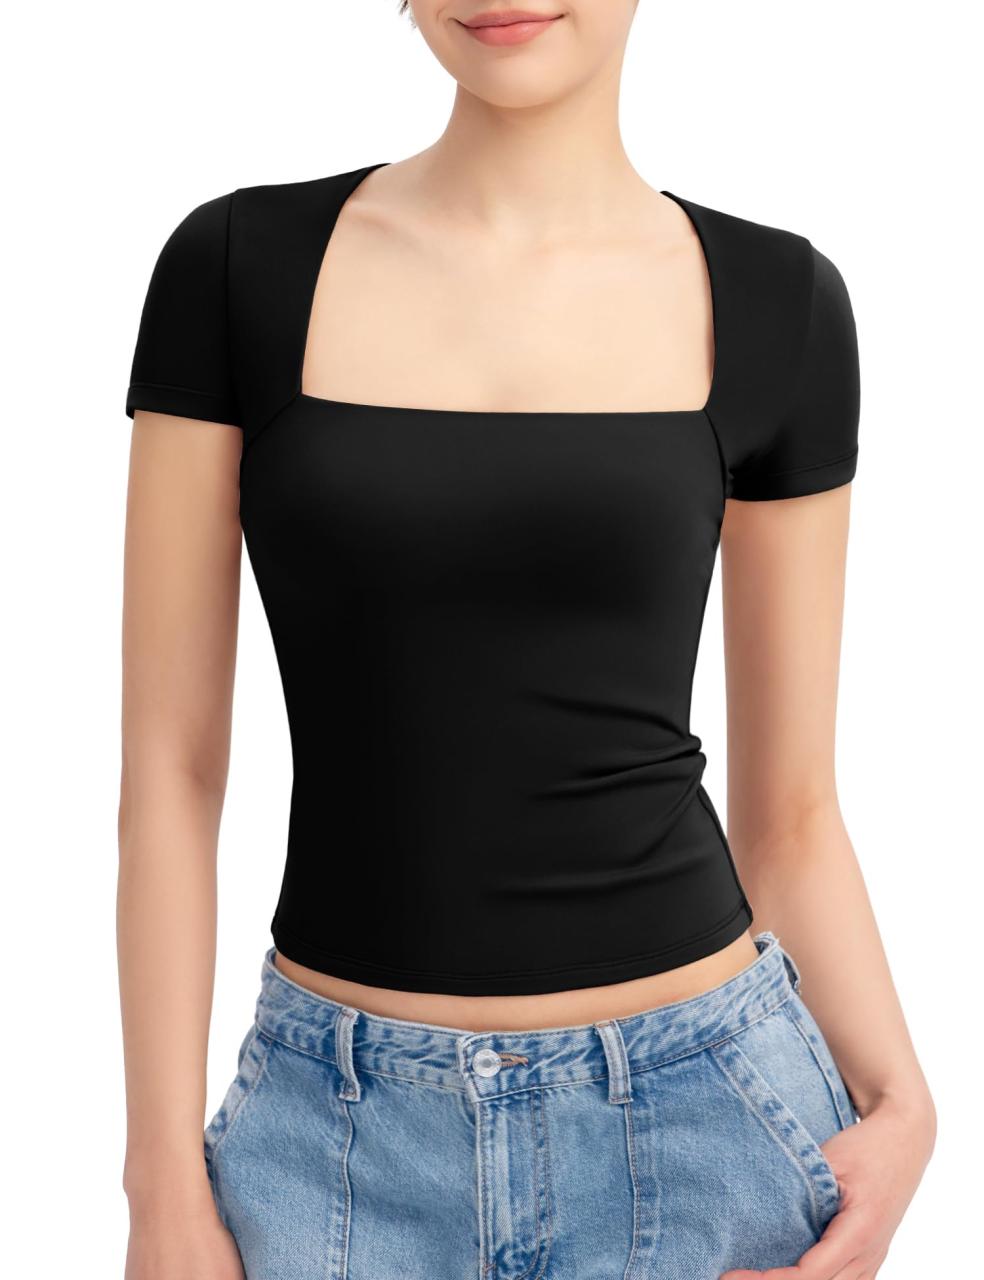 PUMIEY Women's Square Neck Going Out Tops